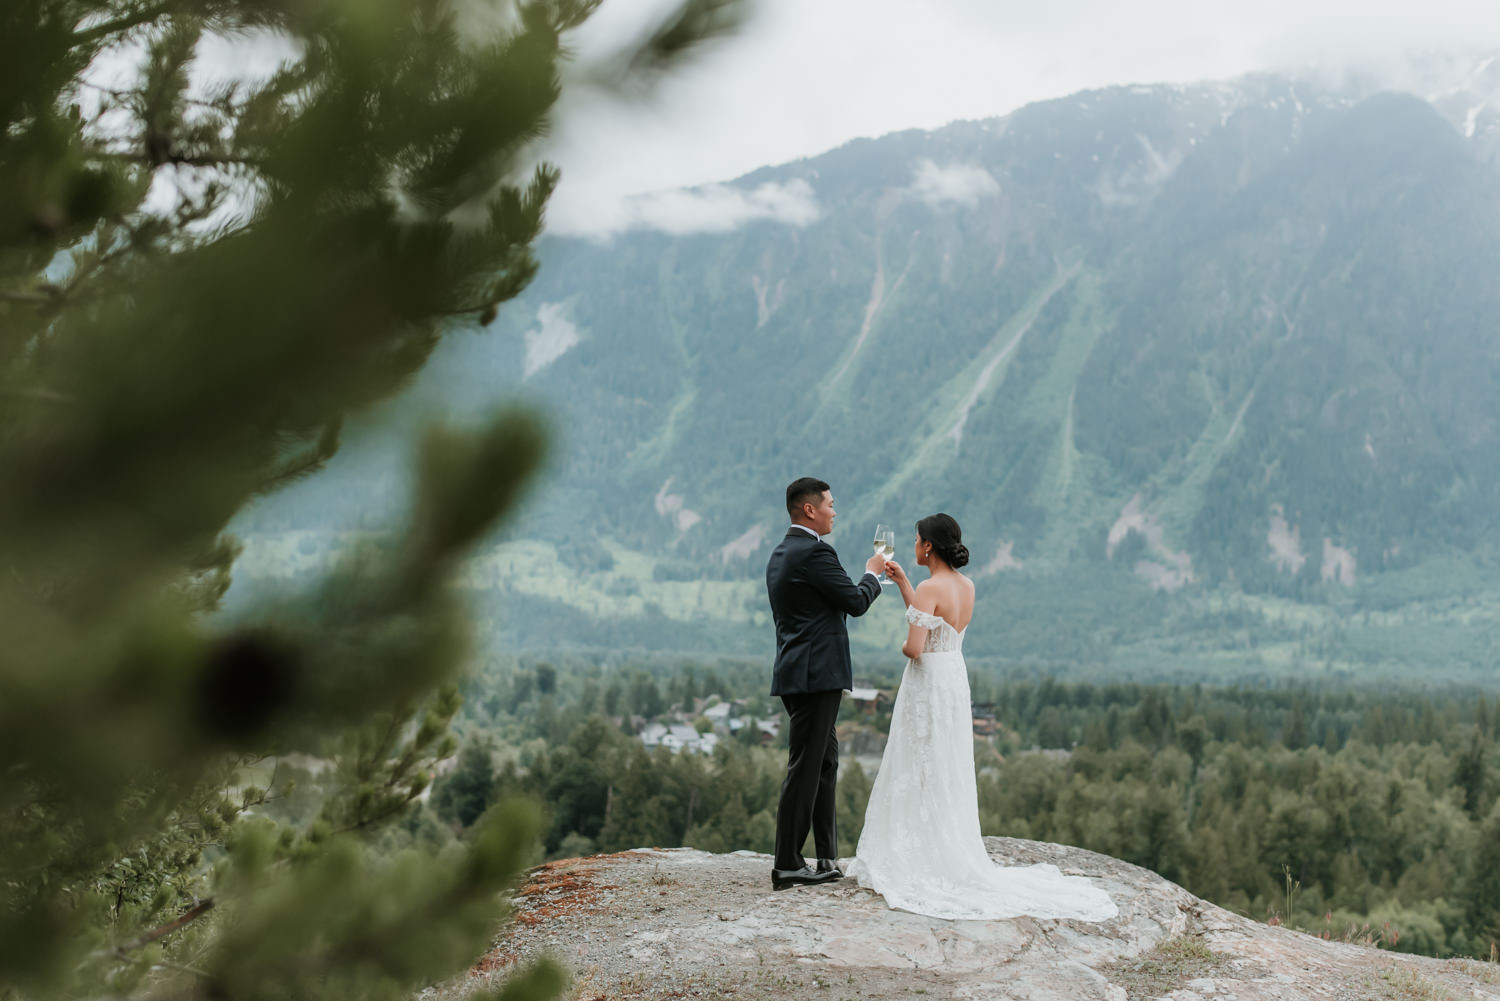 Pemberton wedding photography by Darby Magill